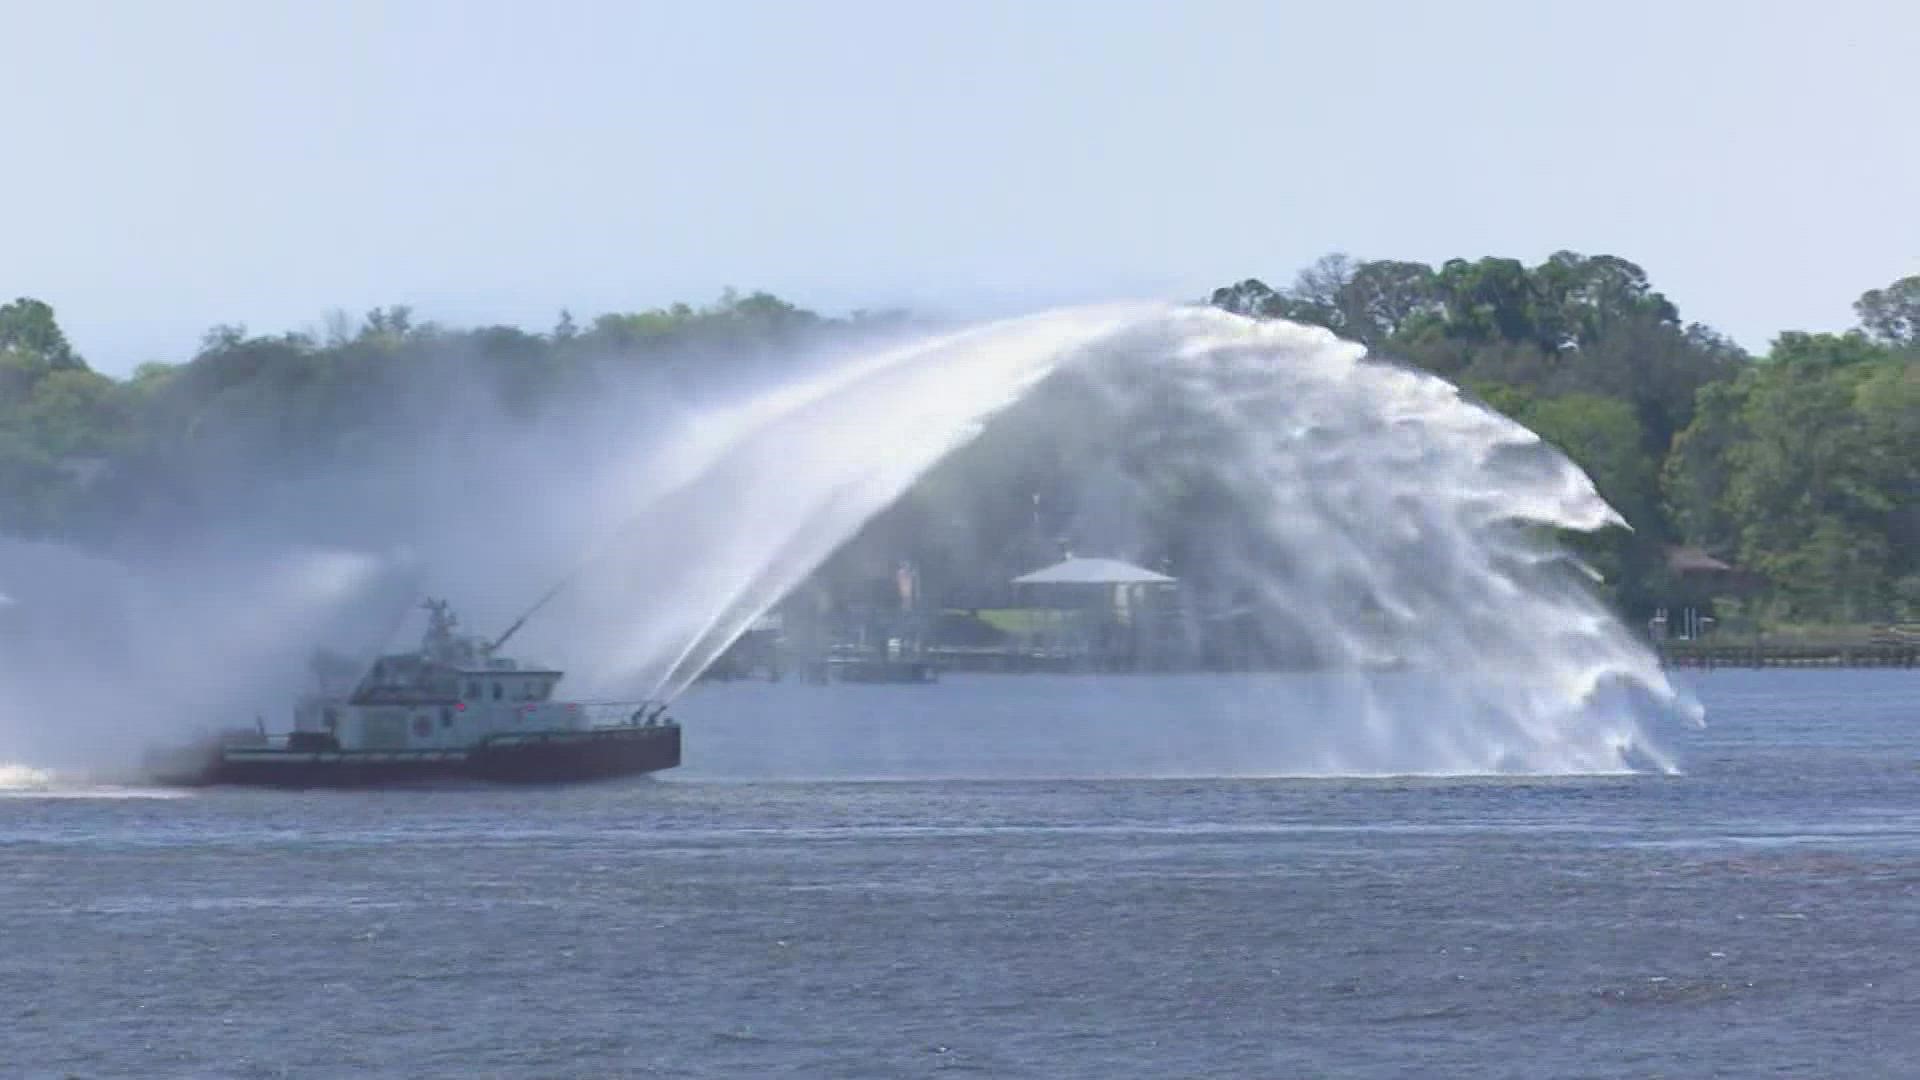 USS Orleck, one of the most decorated ships in U.S. history, made its way into Jacksonville Saturday. A tugboat escorting it blasted in water nozzles showing respect